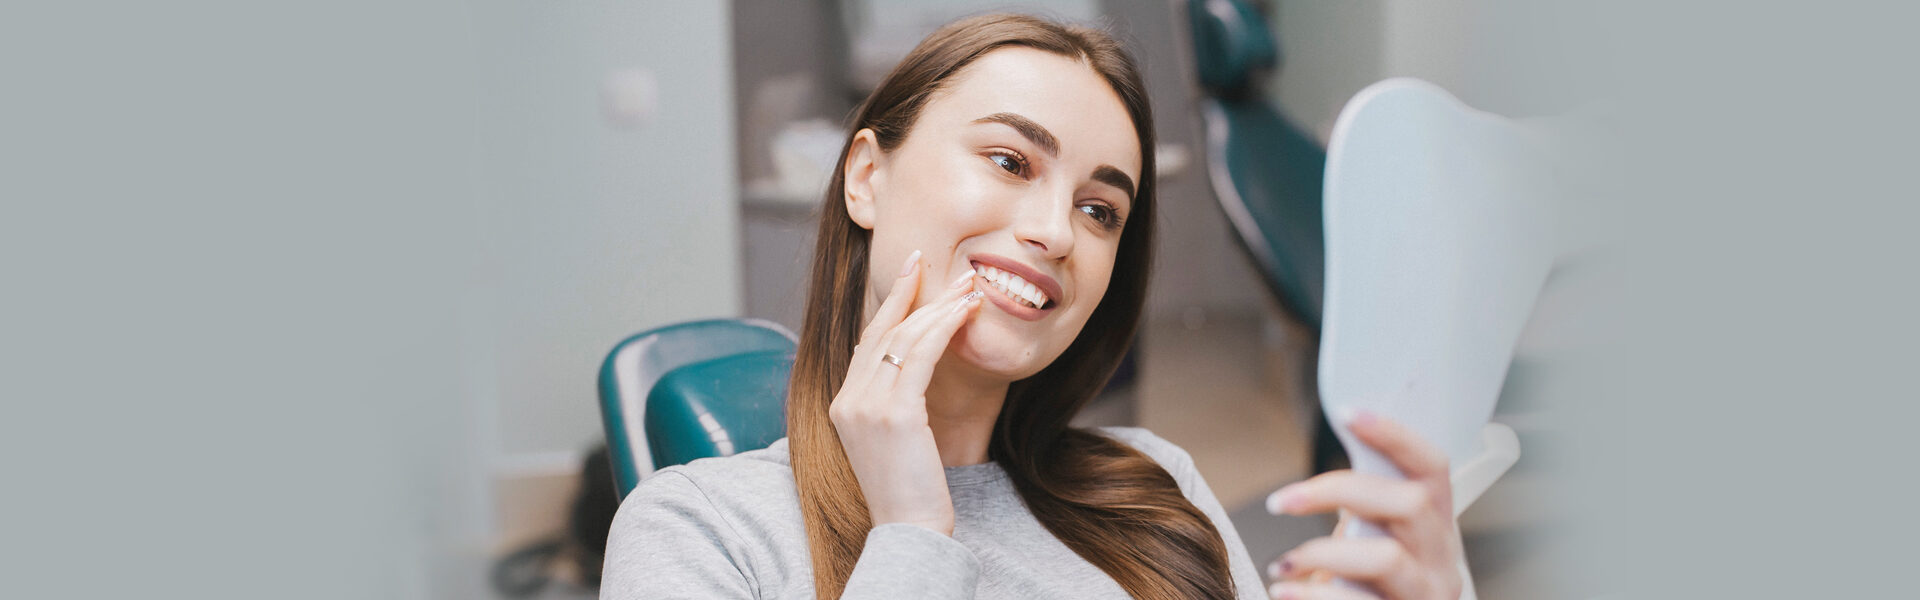 Root Canal Treatment in Brookline, MA